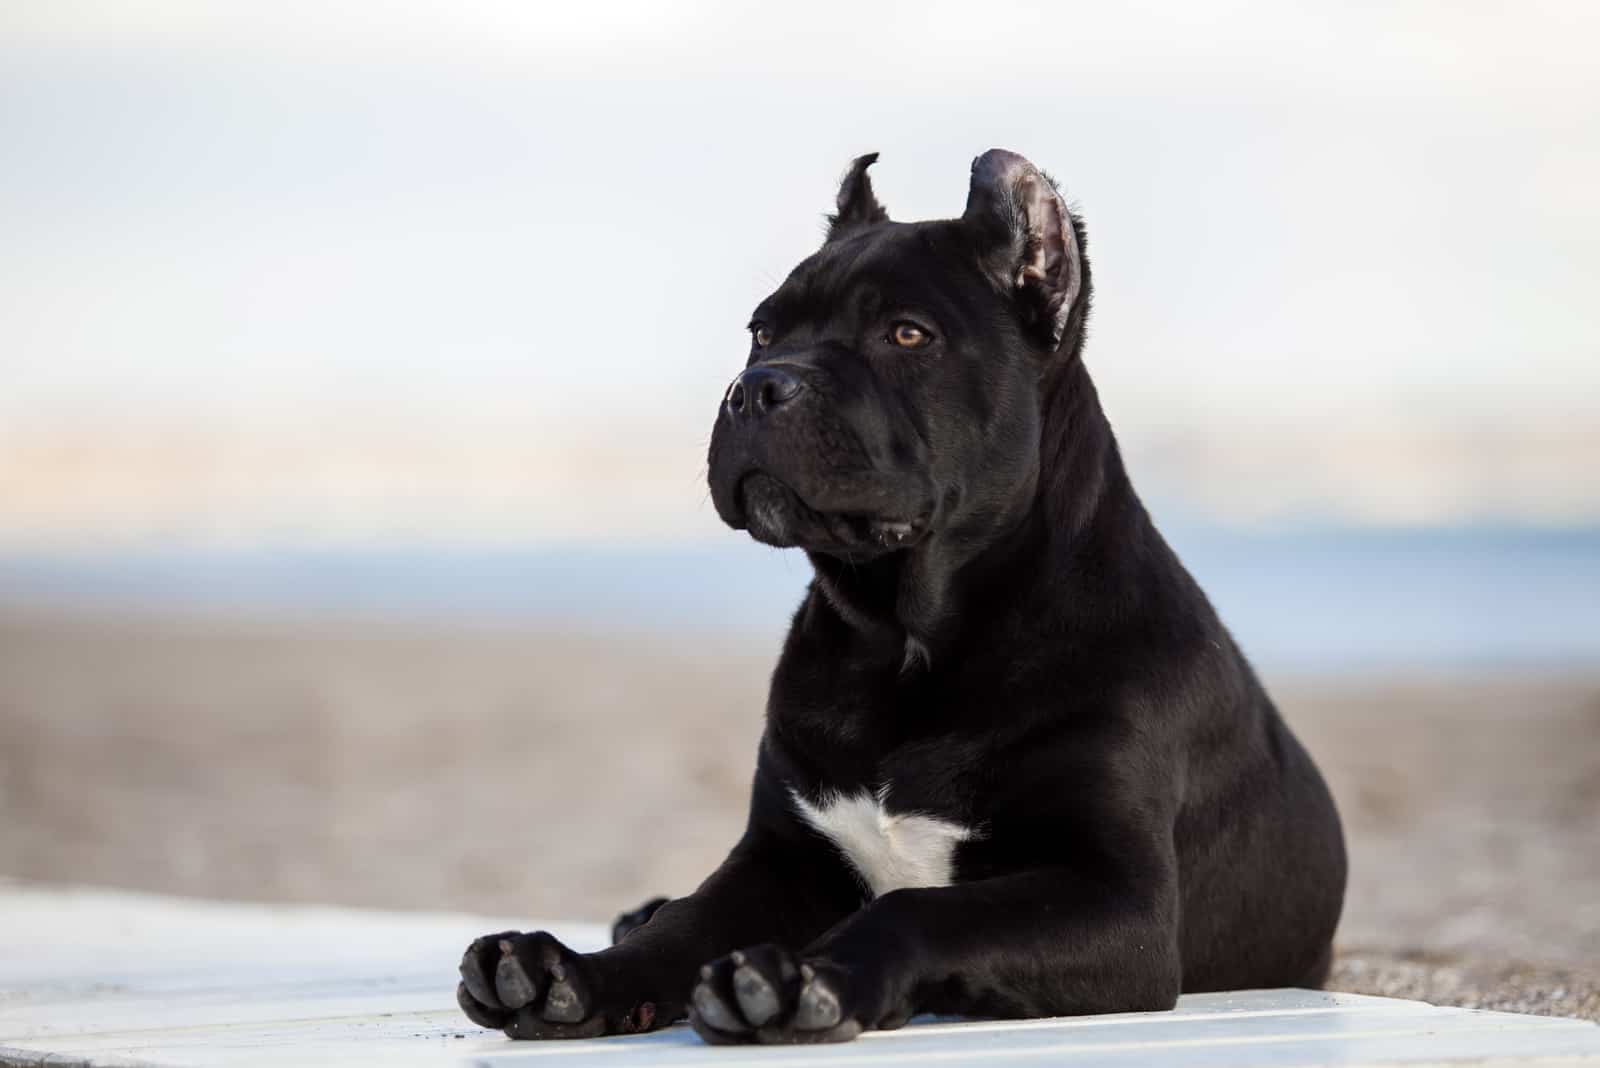 Cane Corso sitting looking away